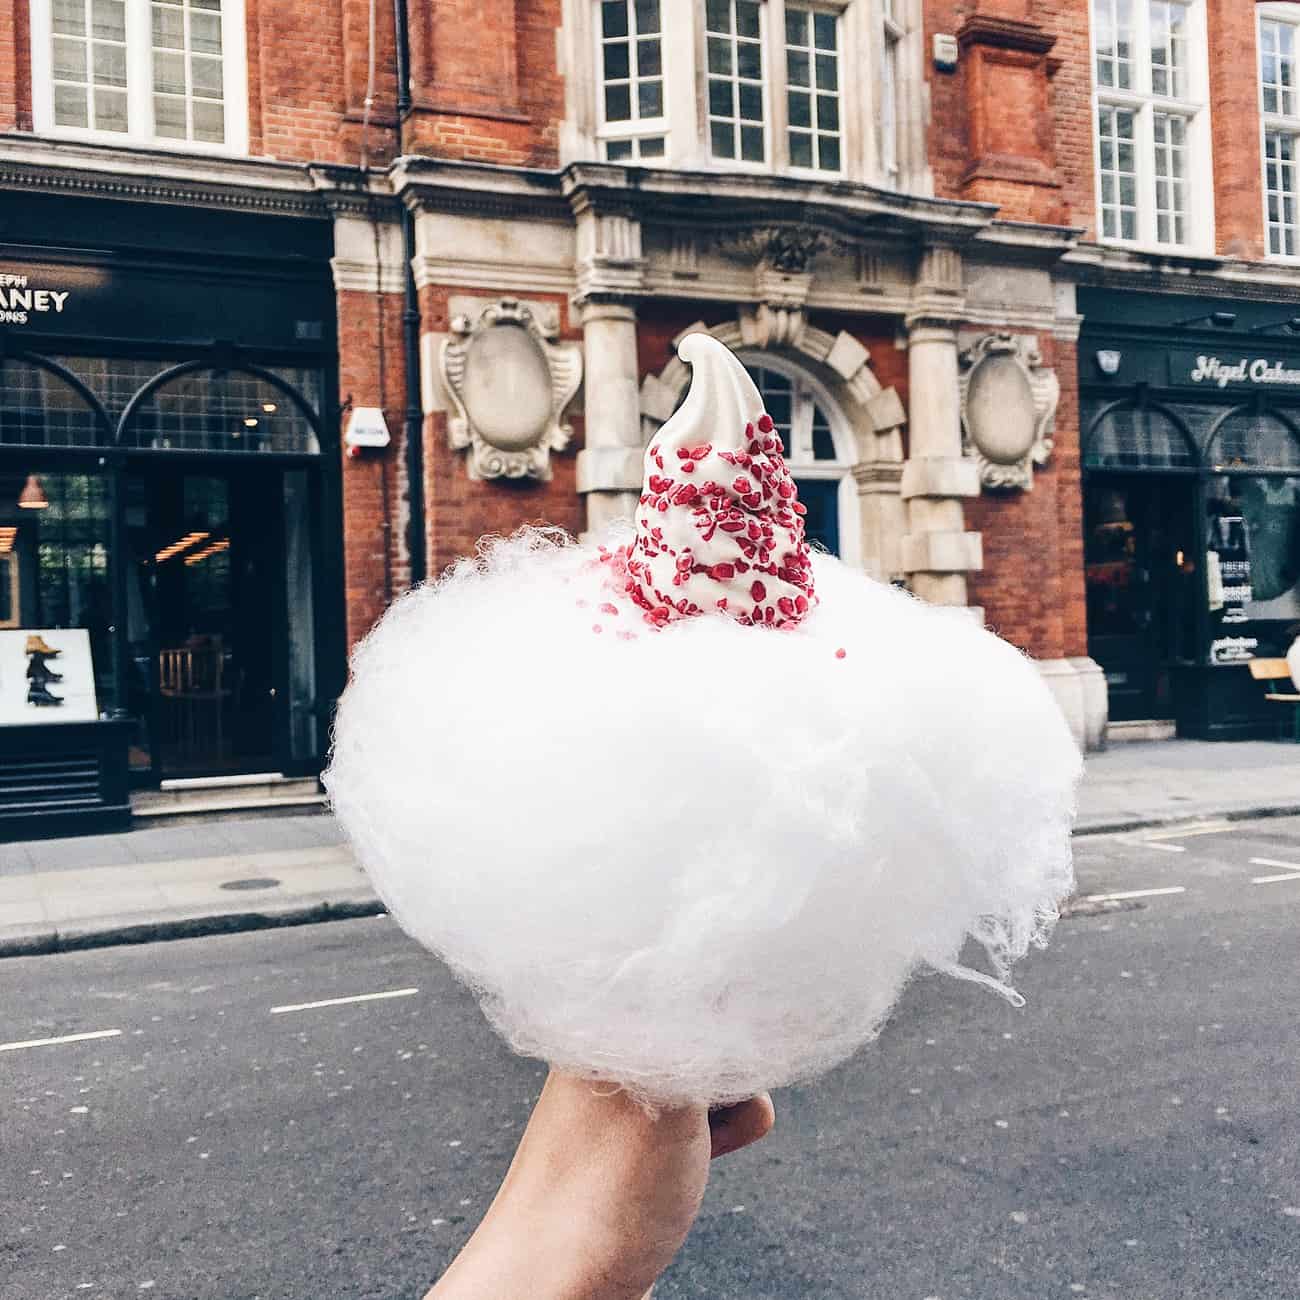 Most Instagrammable cafes in London that you need to visit